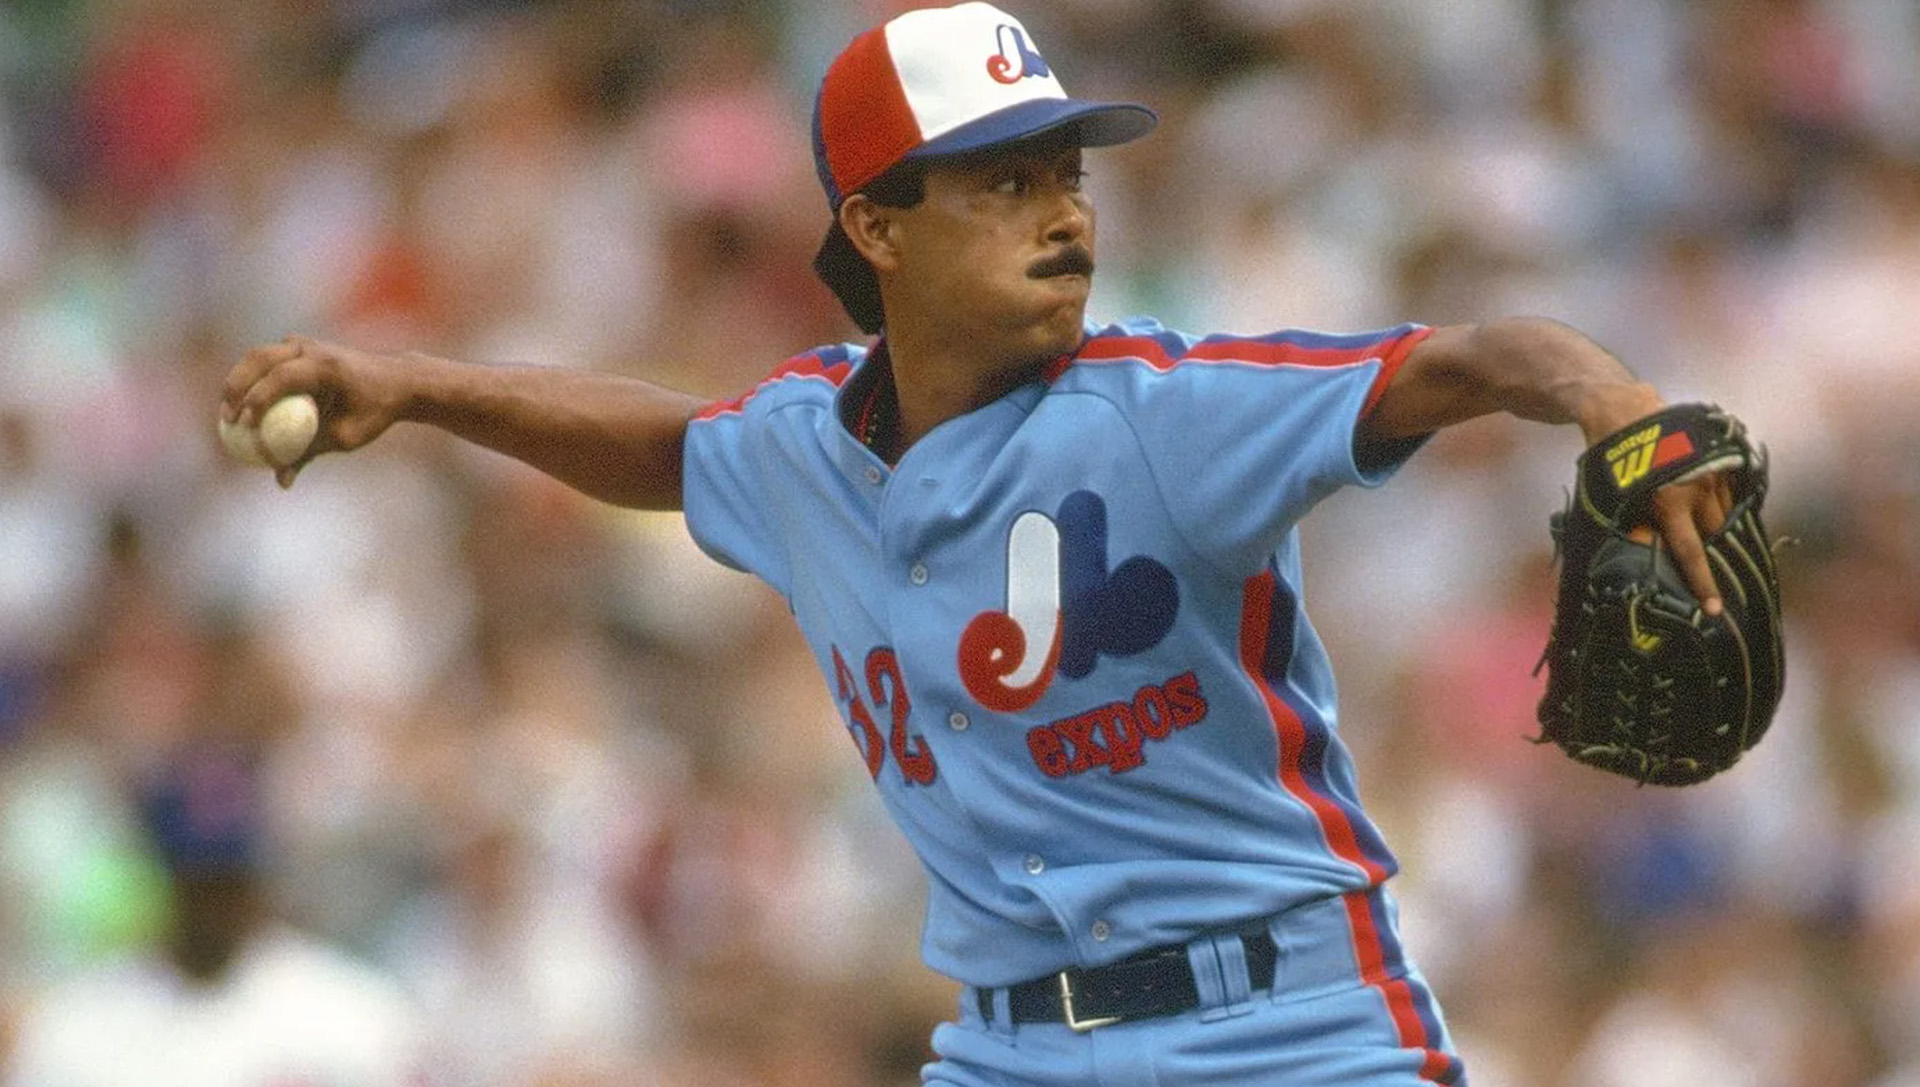 Dennis Martínez is the best baseball player Nicaragua has had in its sporting history.